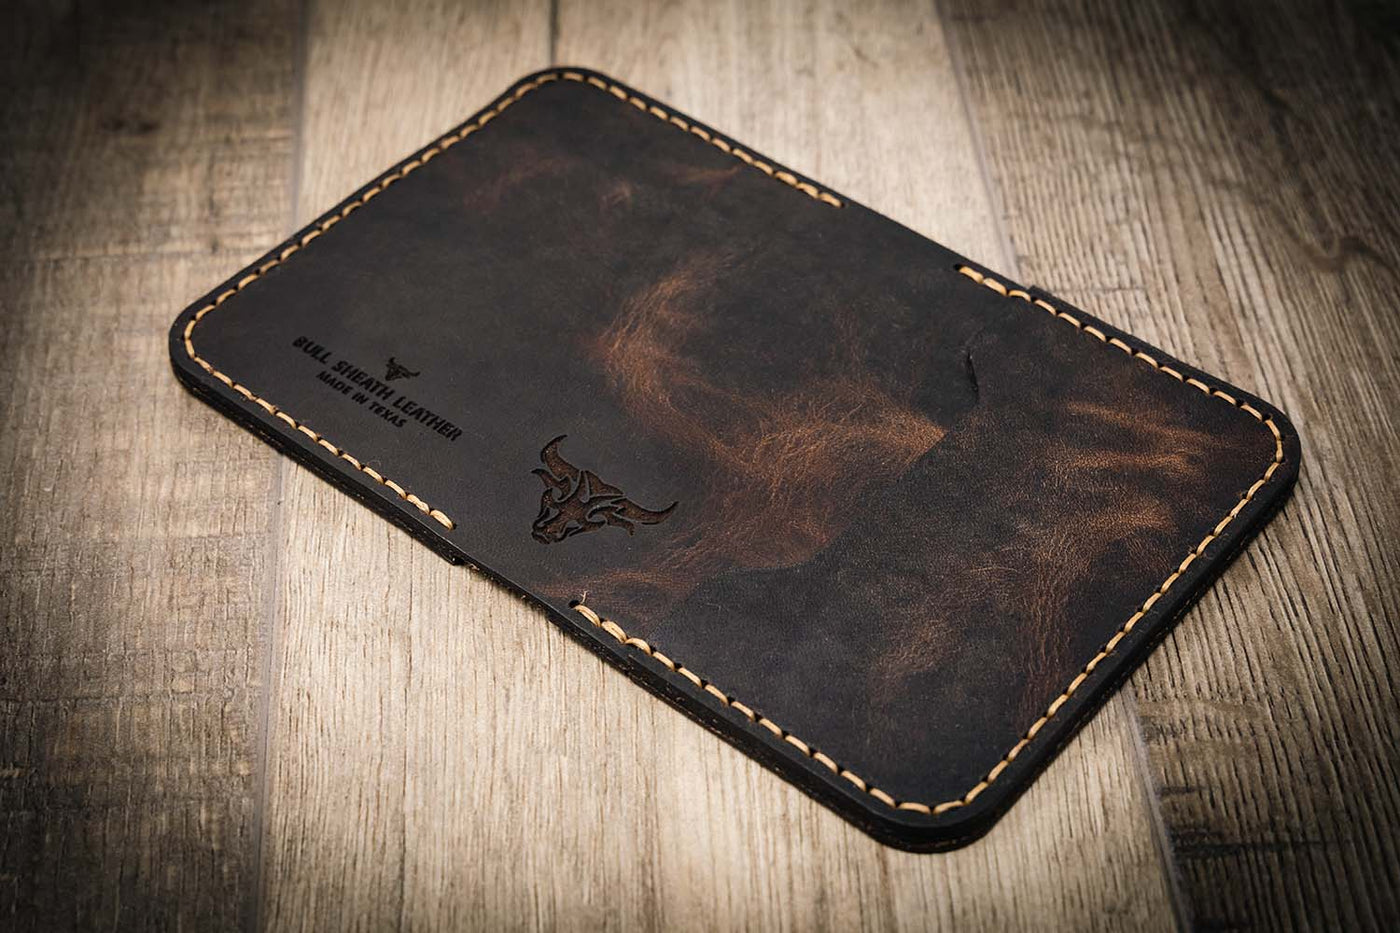 Minimalist wallet made in the USA